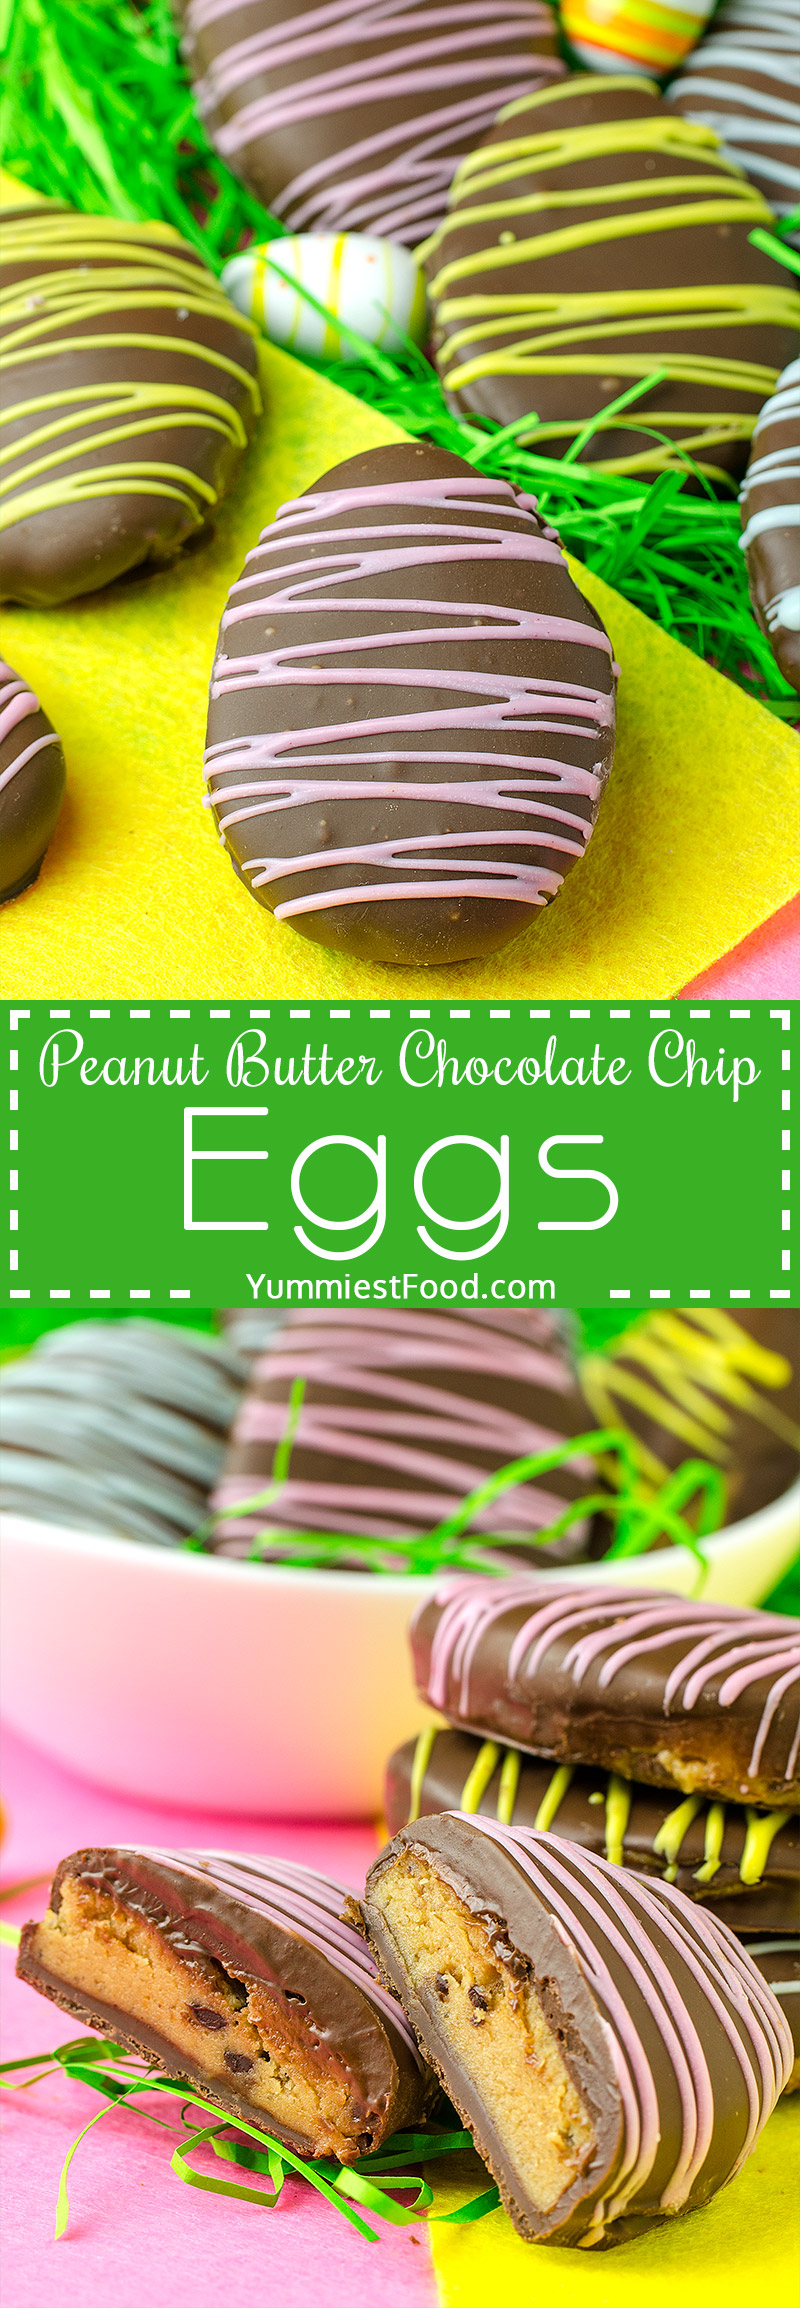 These cute, delicious and easy Peanut Butter Chocolate Chip Eggs are the perfect treat to indulge in this Easter